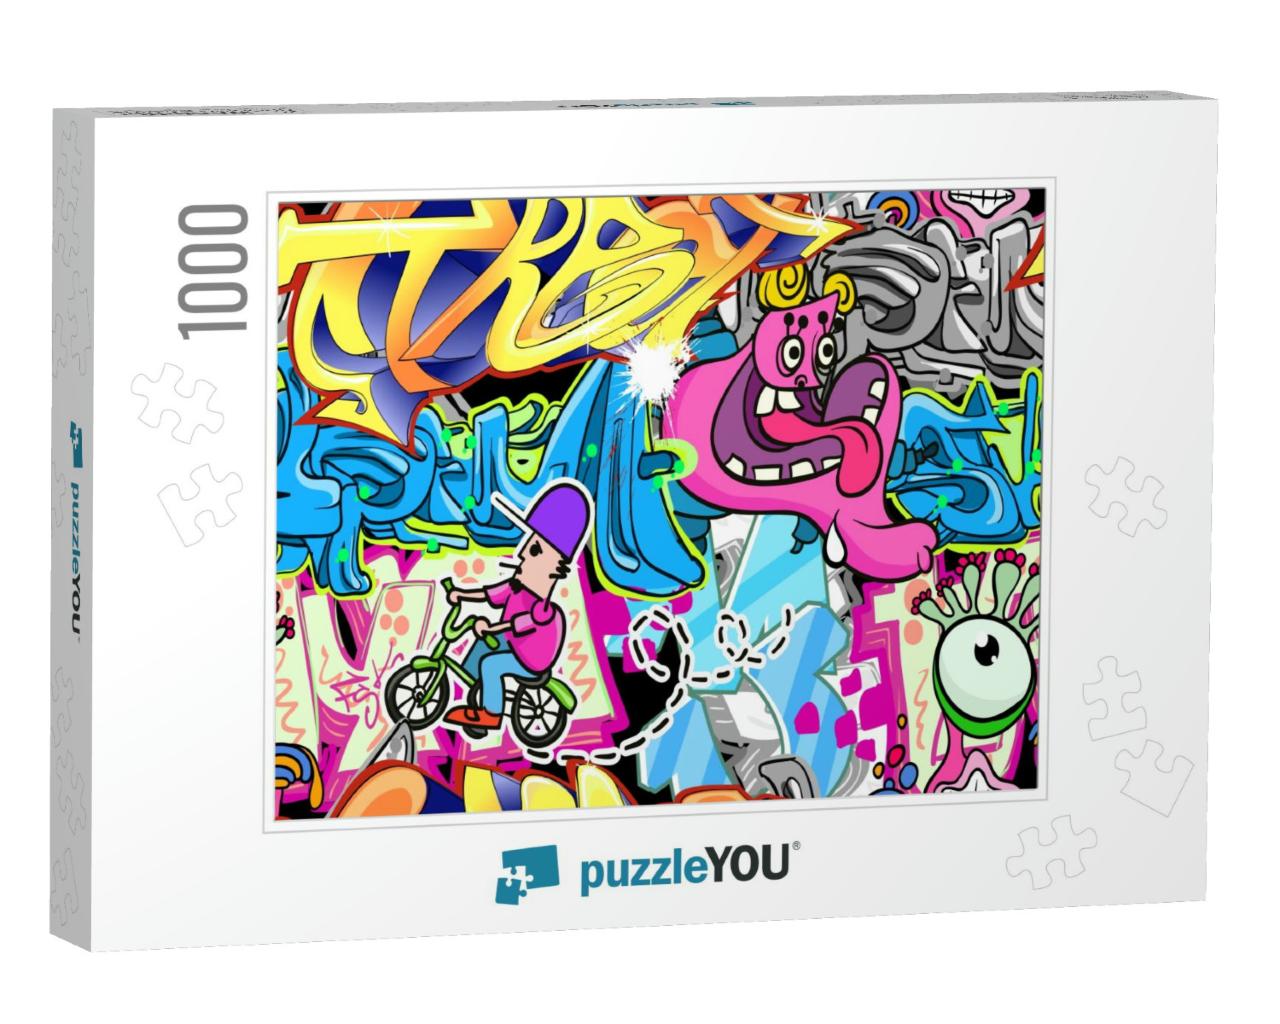 Graffiti Wall Urban Art Seamless Background... Jigsaw Puzzle with 1000 pieces